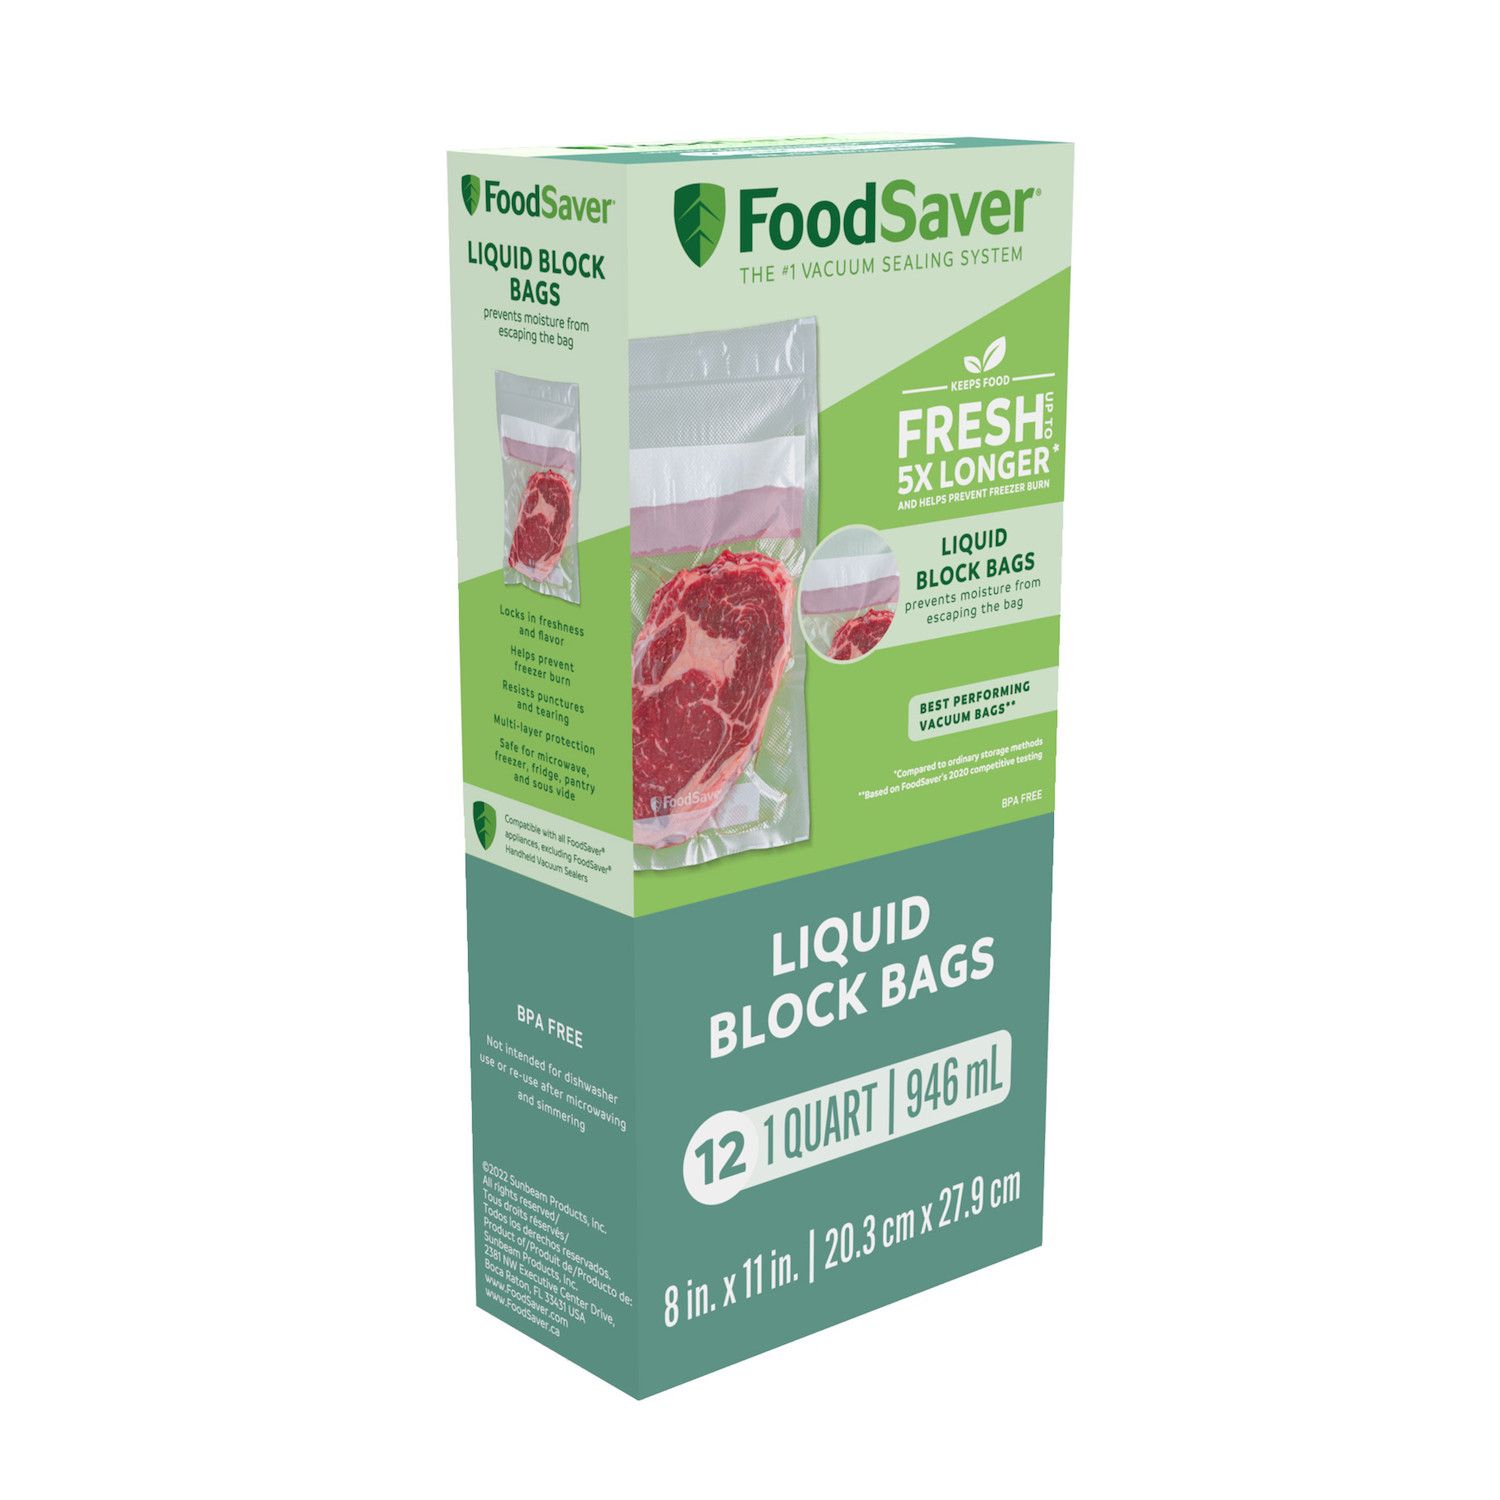 FoodSaver 1-Quart Precut Vacuum Seal Bags with BPA-Free Multilayer  Construction for Food Preservation, 44 Count & 11 x 16' Vacuum Seal Roll |  Make